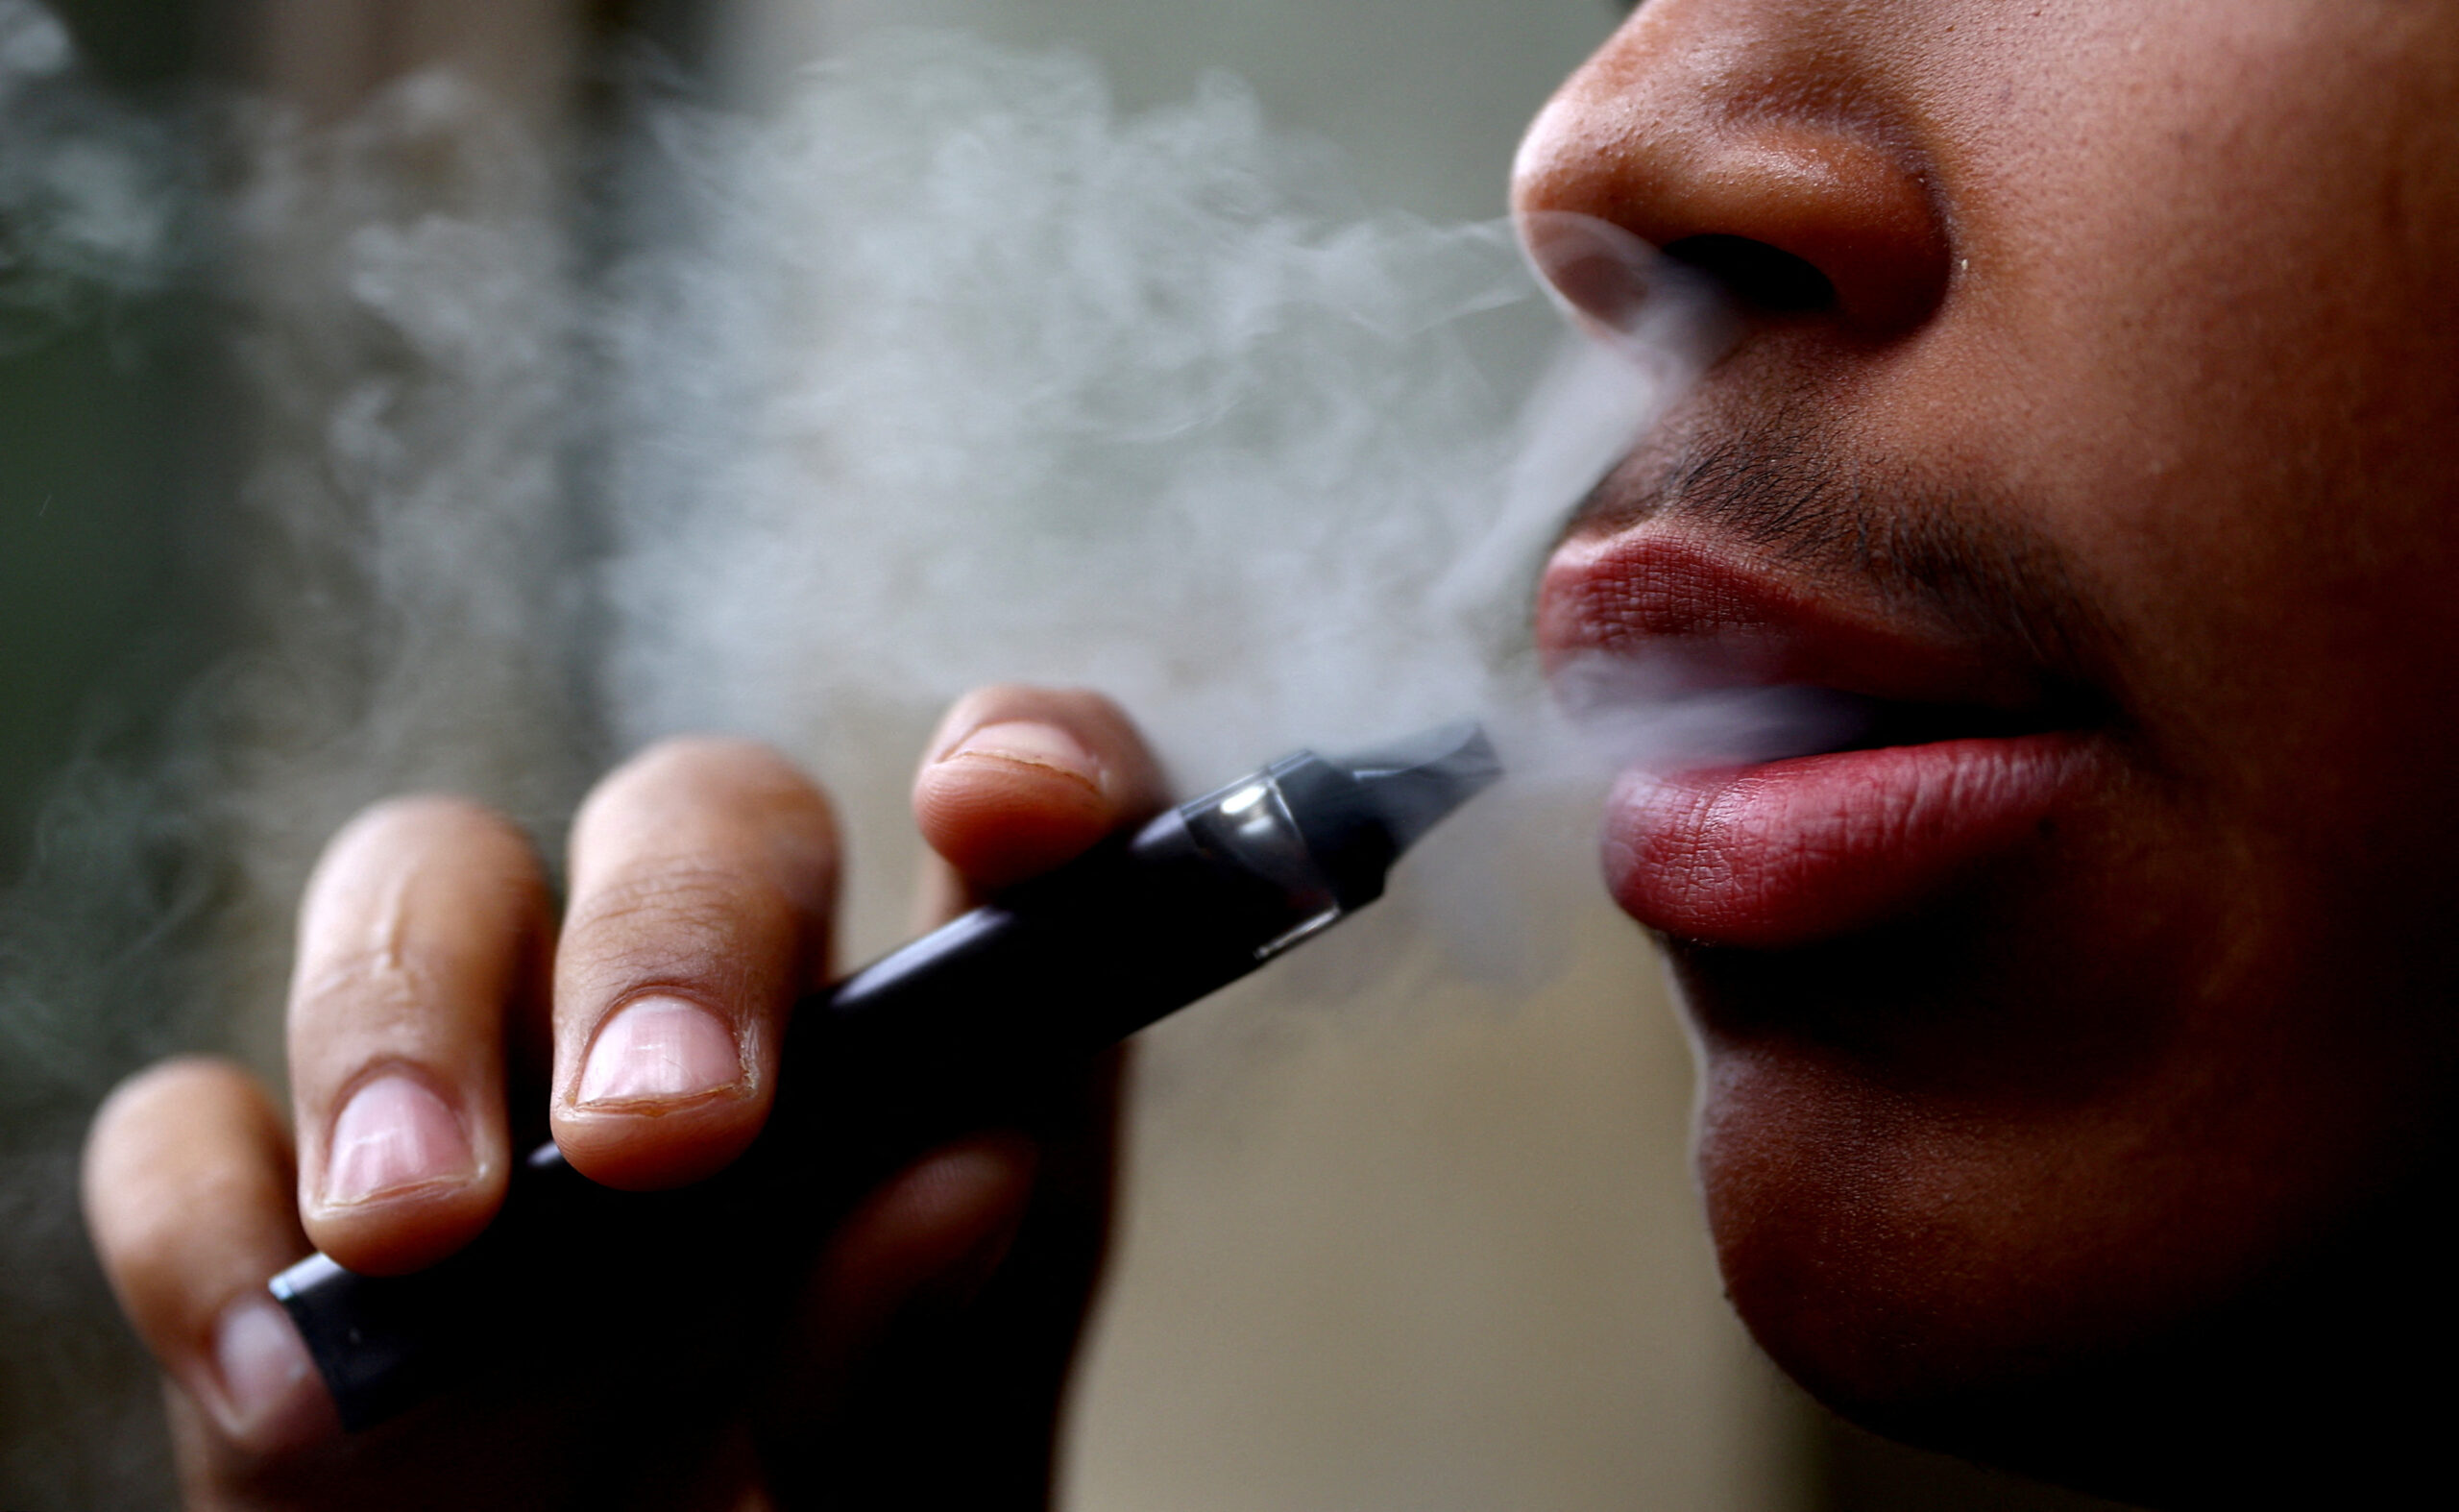 UK Government To Ban Disposable Vaping Devices To Prevent Use By Children